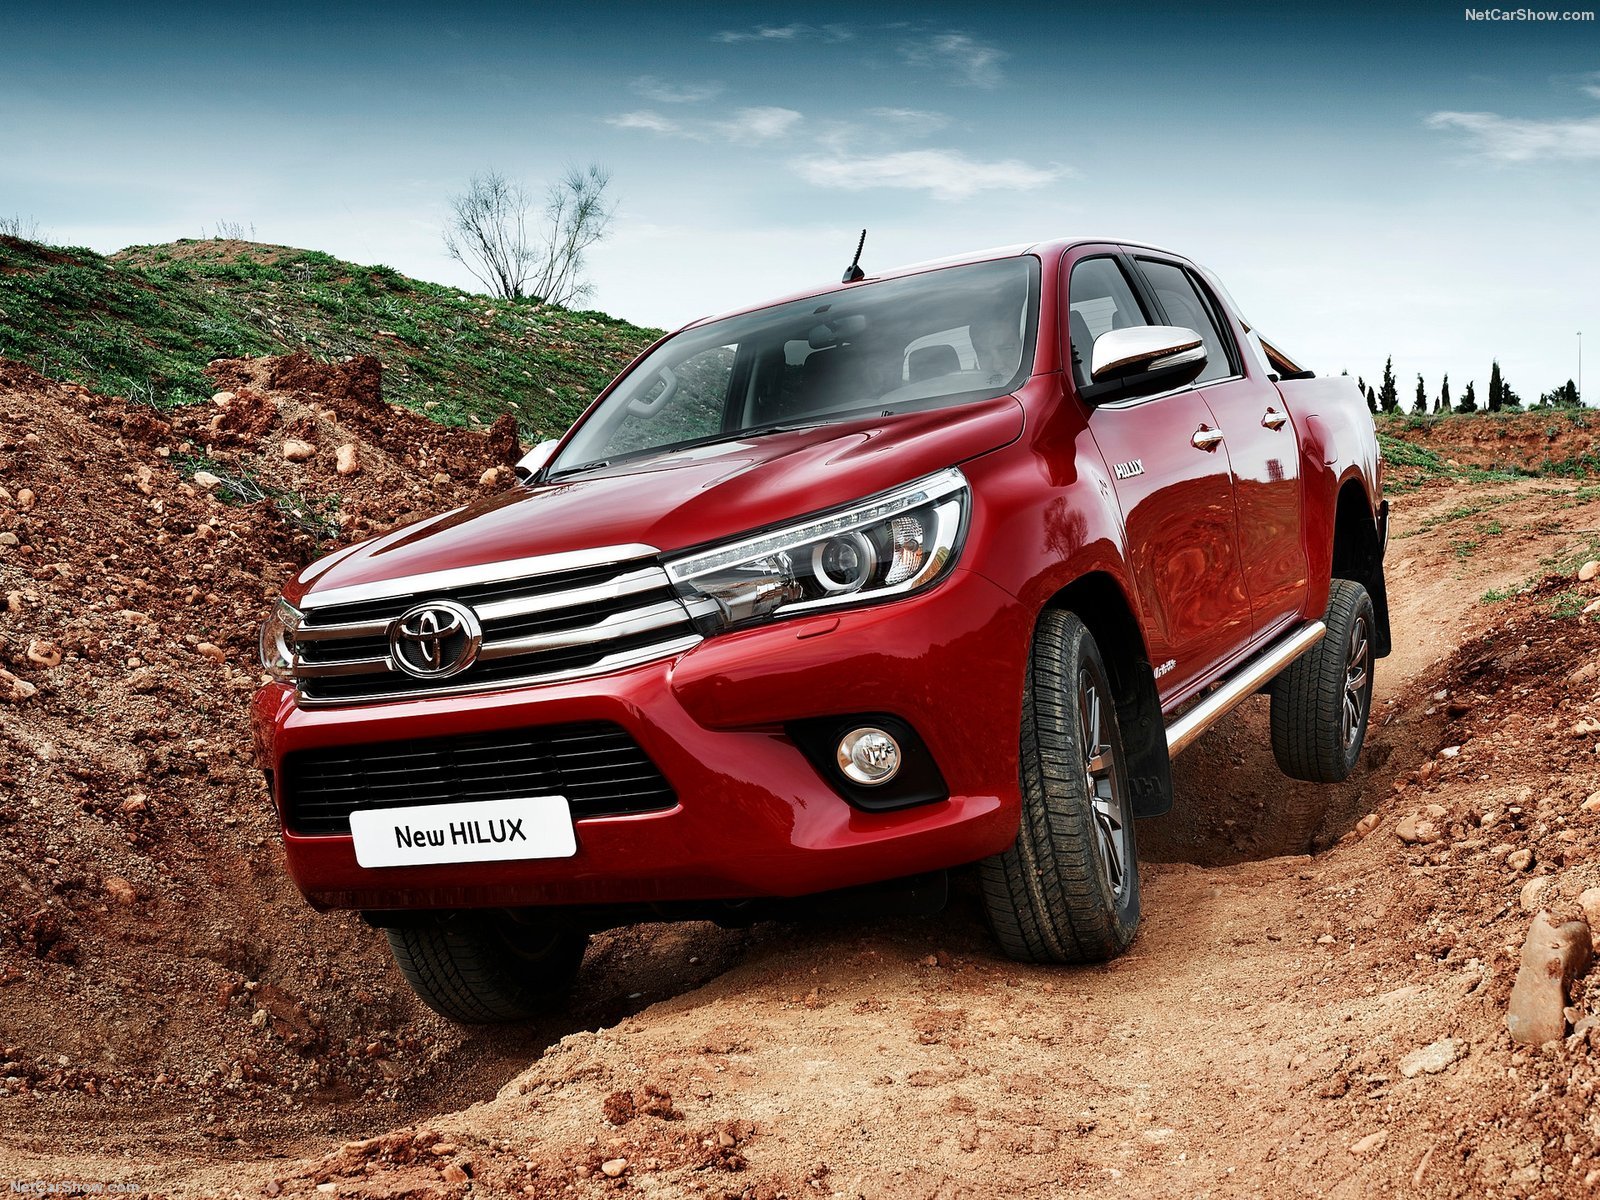 2016, 4x4, Red, Cars, Hilux, Pickup, Toyota Wallpaper